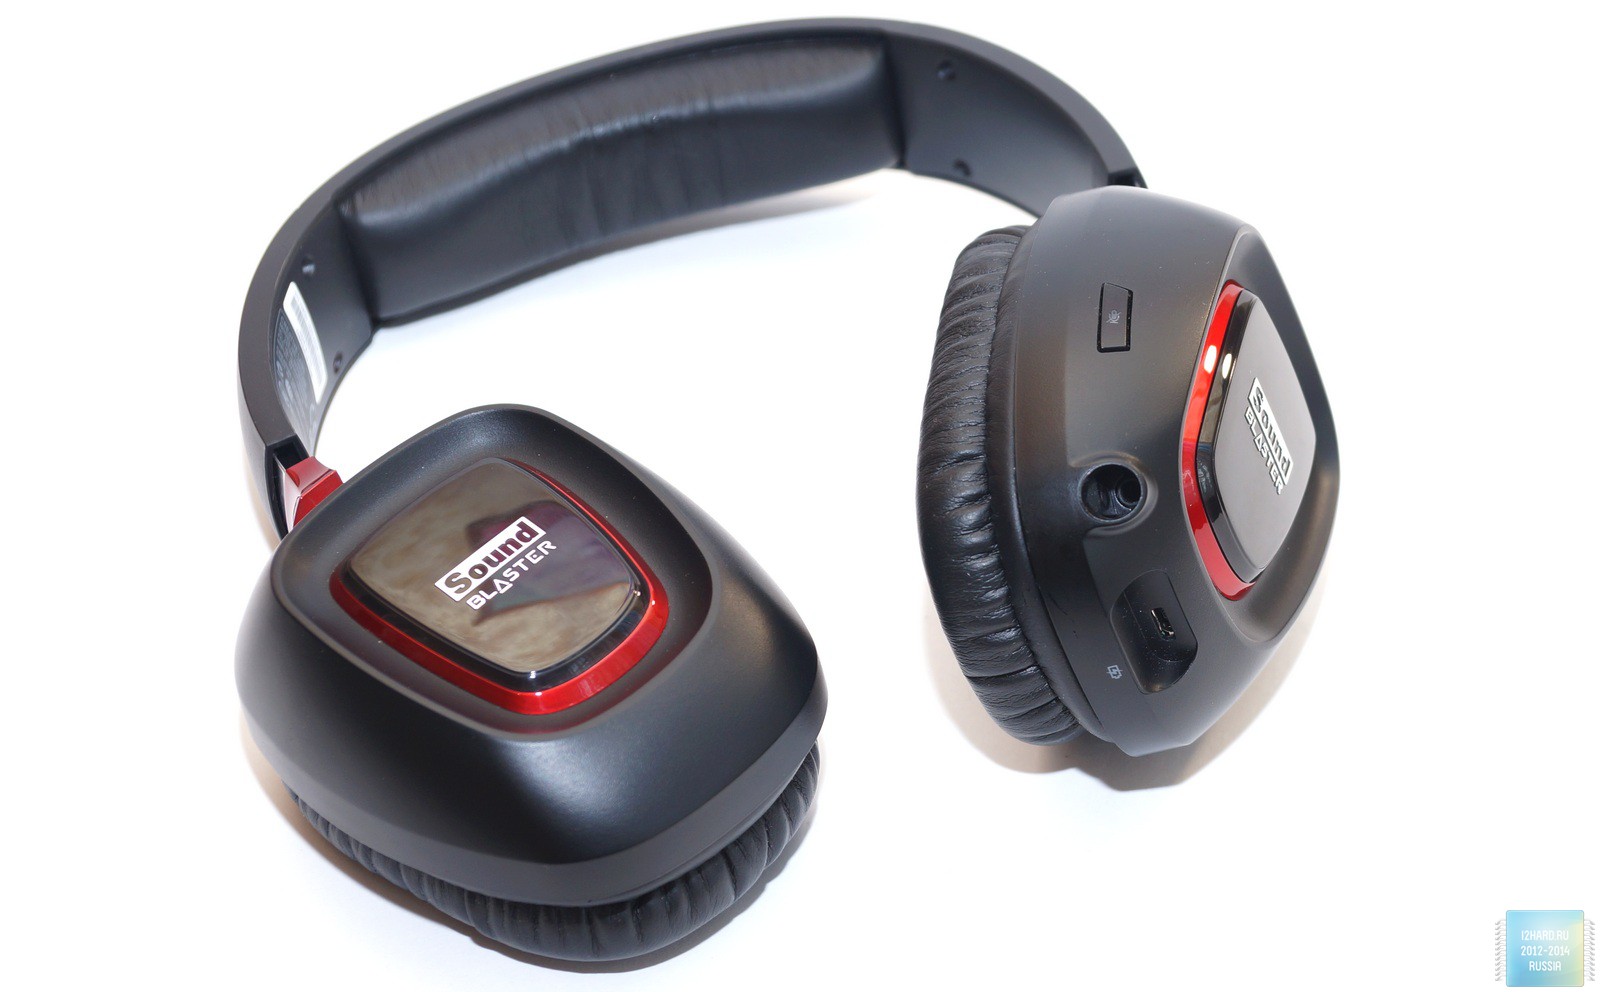 Complete with scared. Наушники Sound Blaster gh0180a. Creative Sound Blaster hx6 7.1 наушники. Sound Blaster tactic3d Alpha звуковая карта. Наушники Soundking ej780.